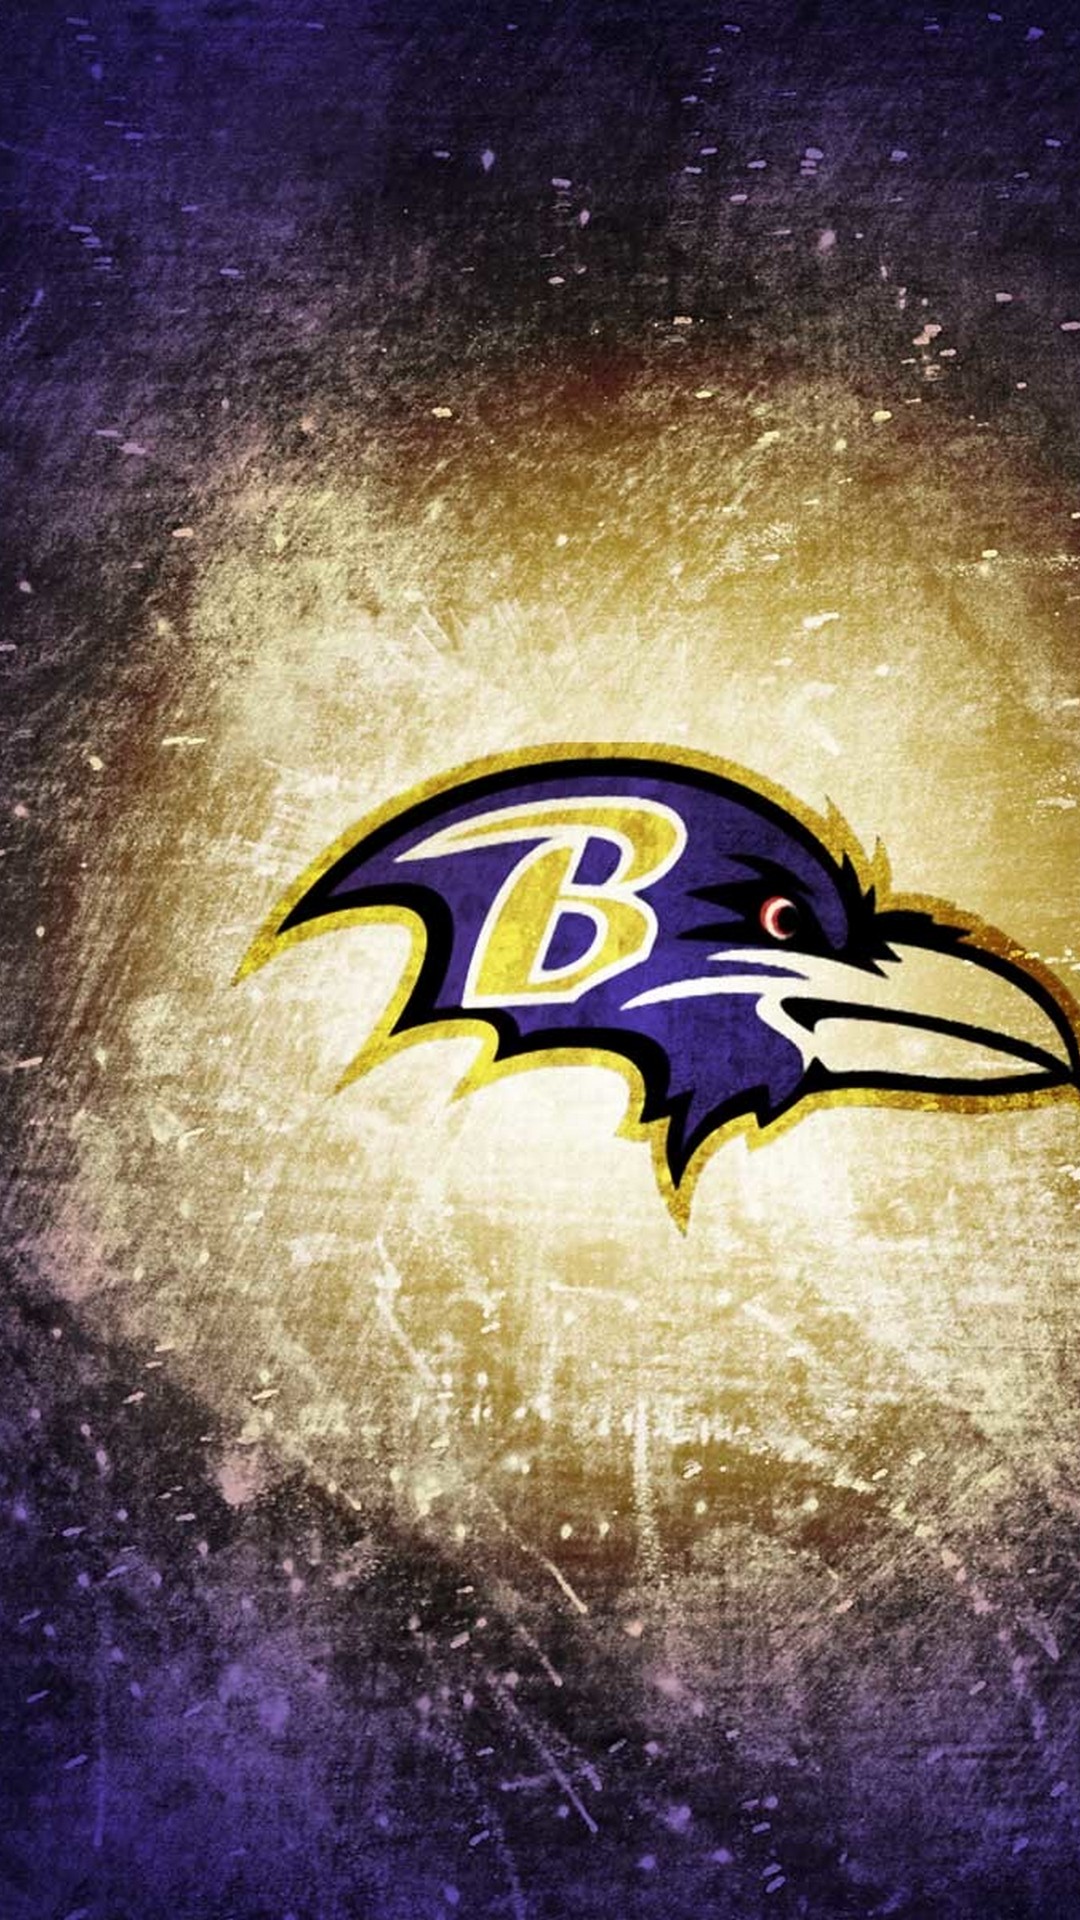 Baltimore Ravens iPhone Home Screen Wallpaper With high-resolution 1080X1920 pixel. Download and set as wallpaper for Apple iPhone X, XS Max, XR, 8, 7, 6, SE, iPad, Android